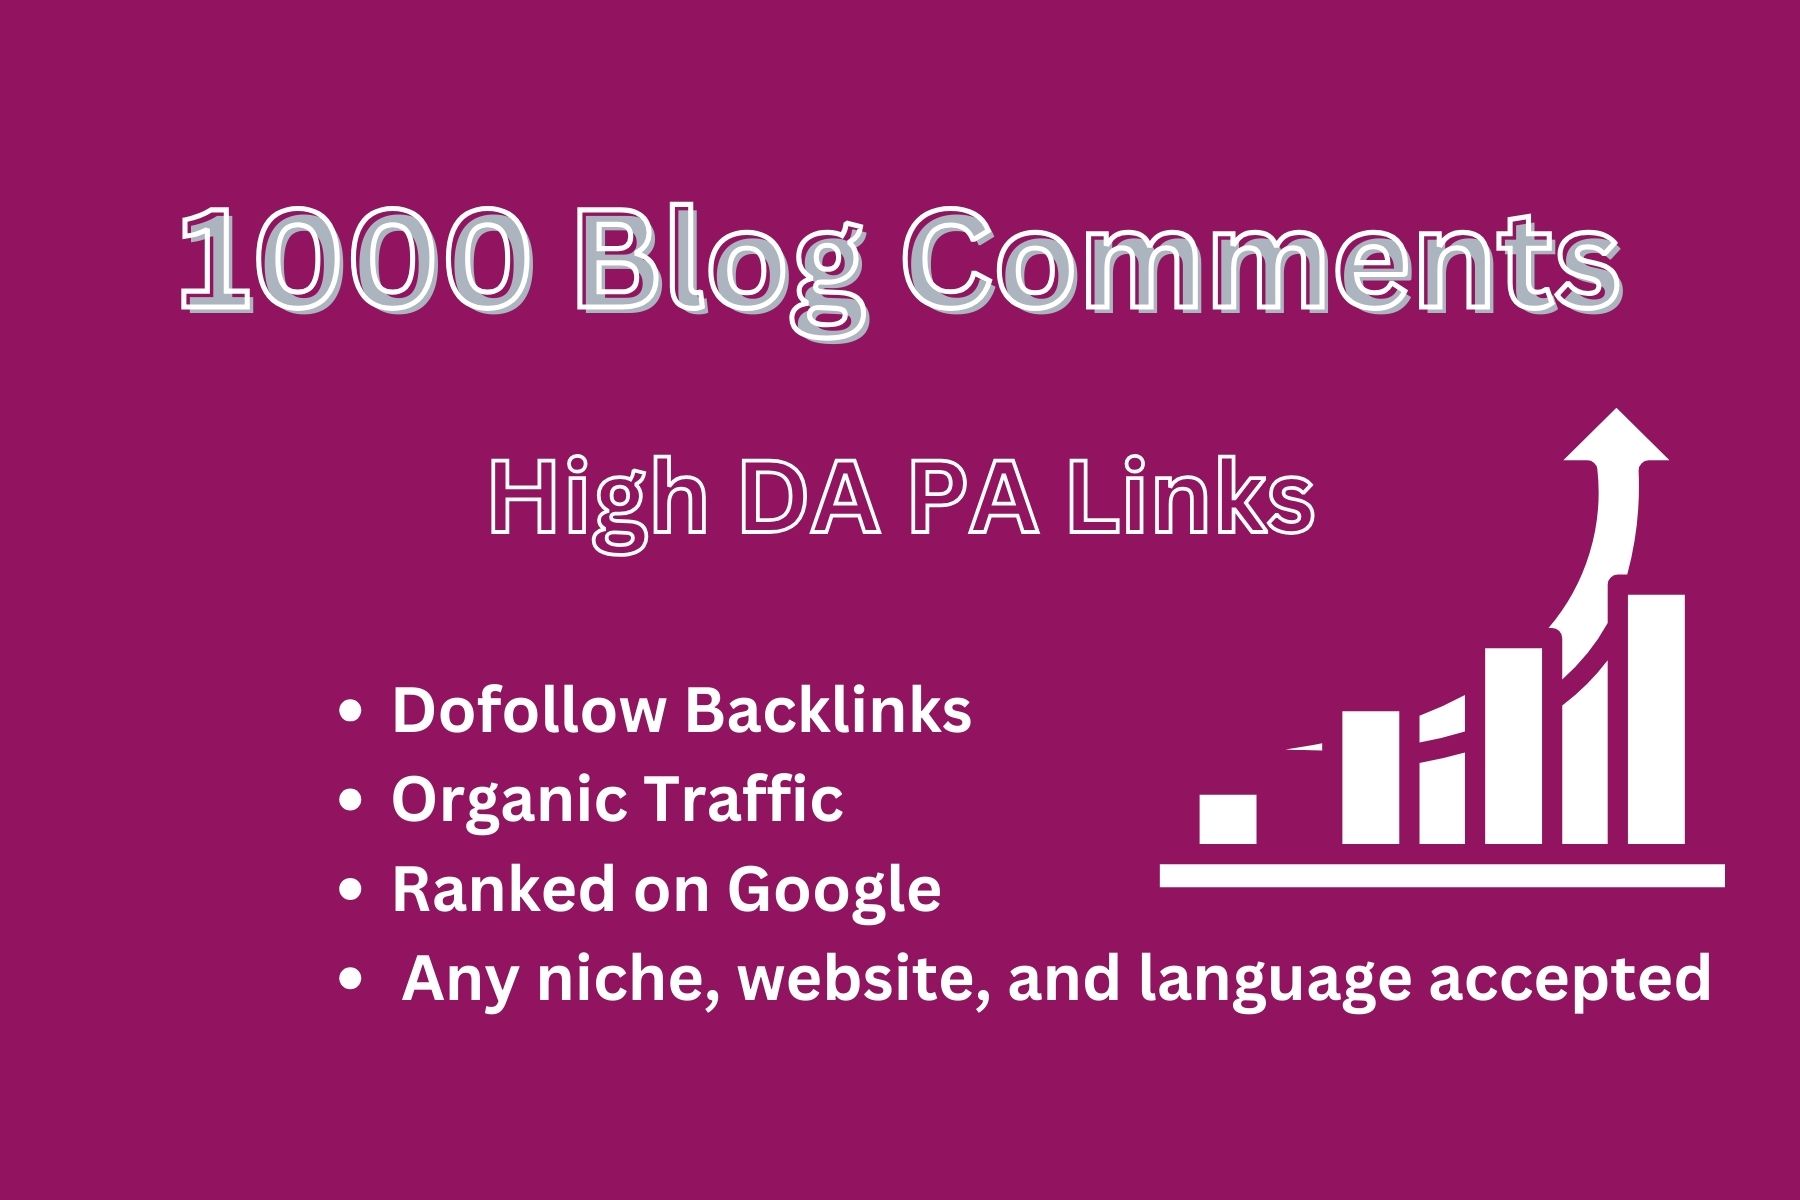 Get 1000 blog comment backlinks for increased link juice and faster Google indexing with GSA SER Blast SEO.